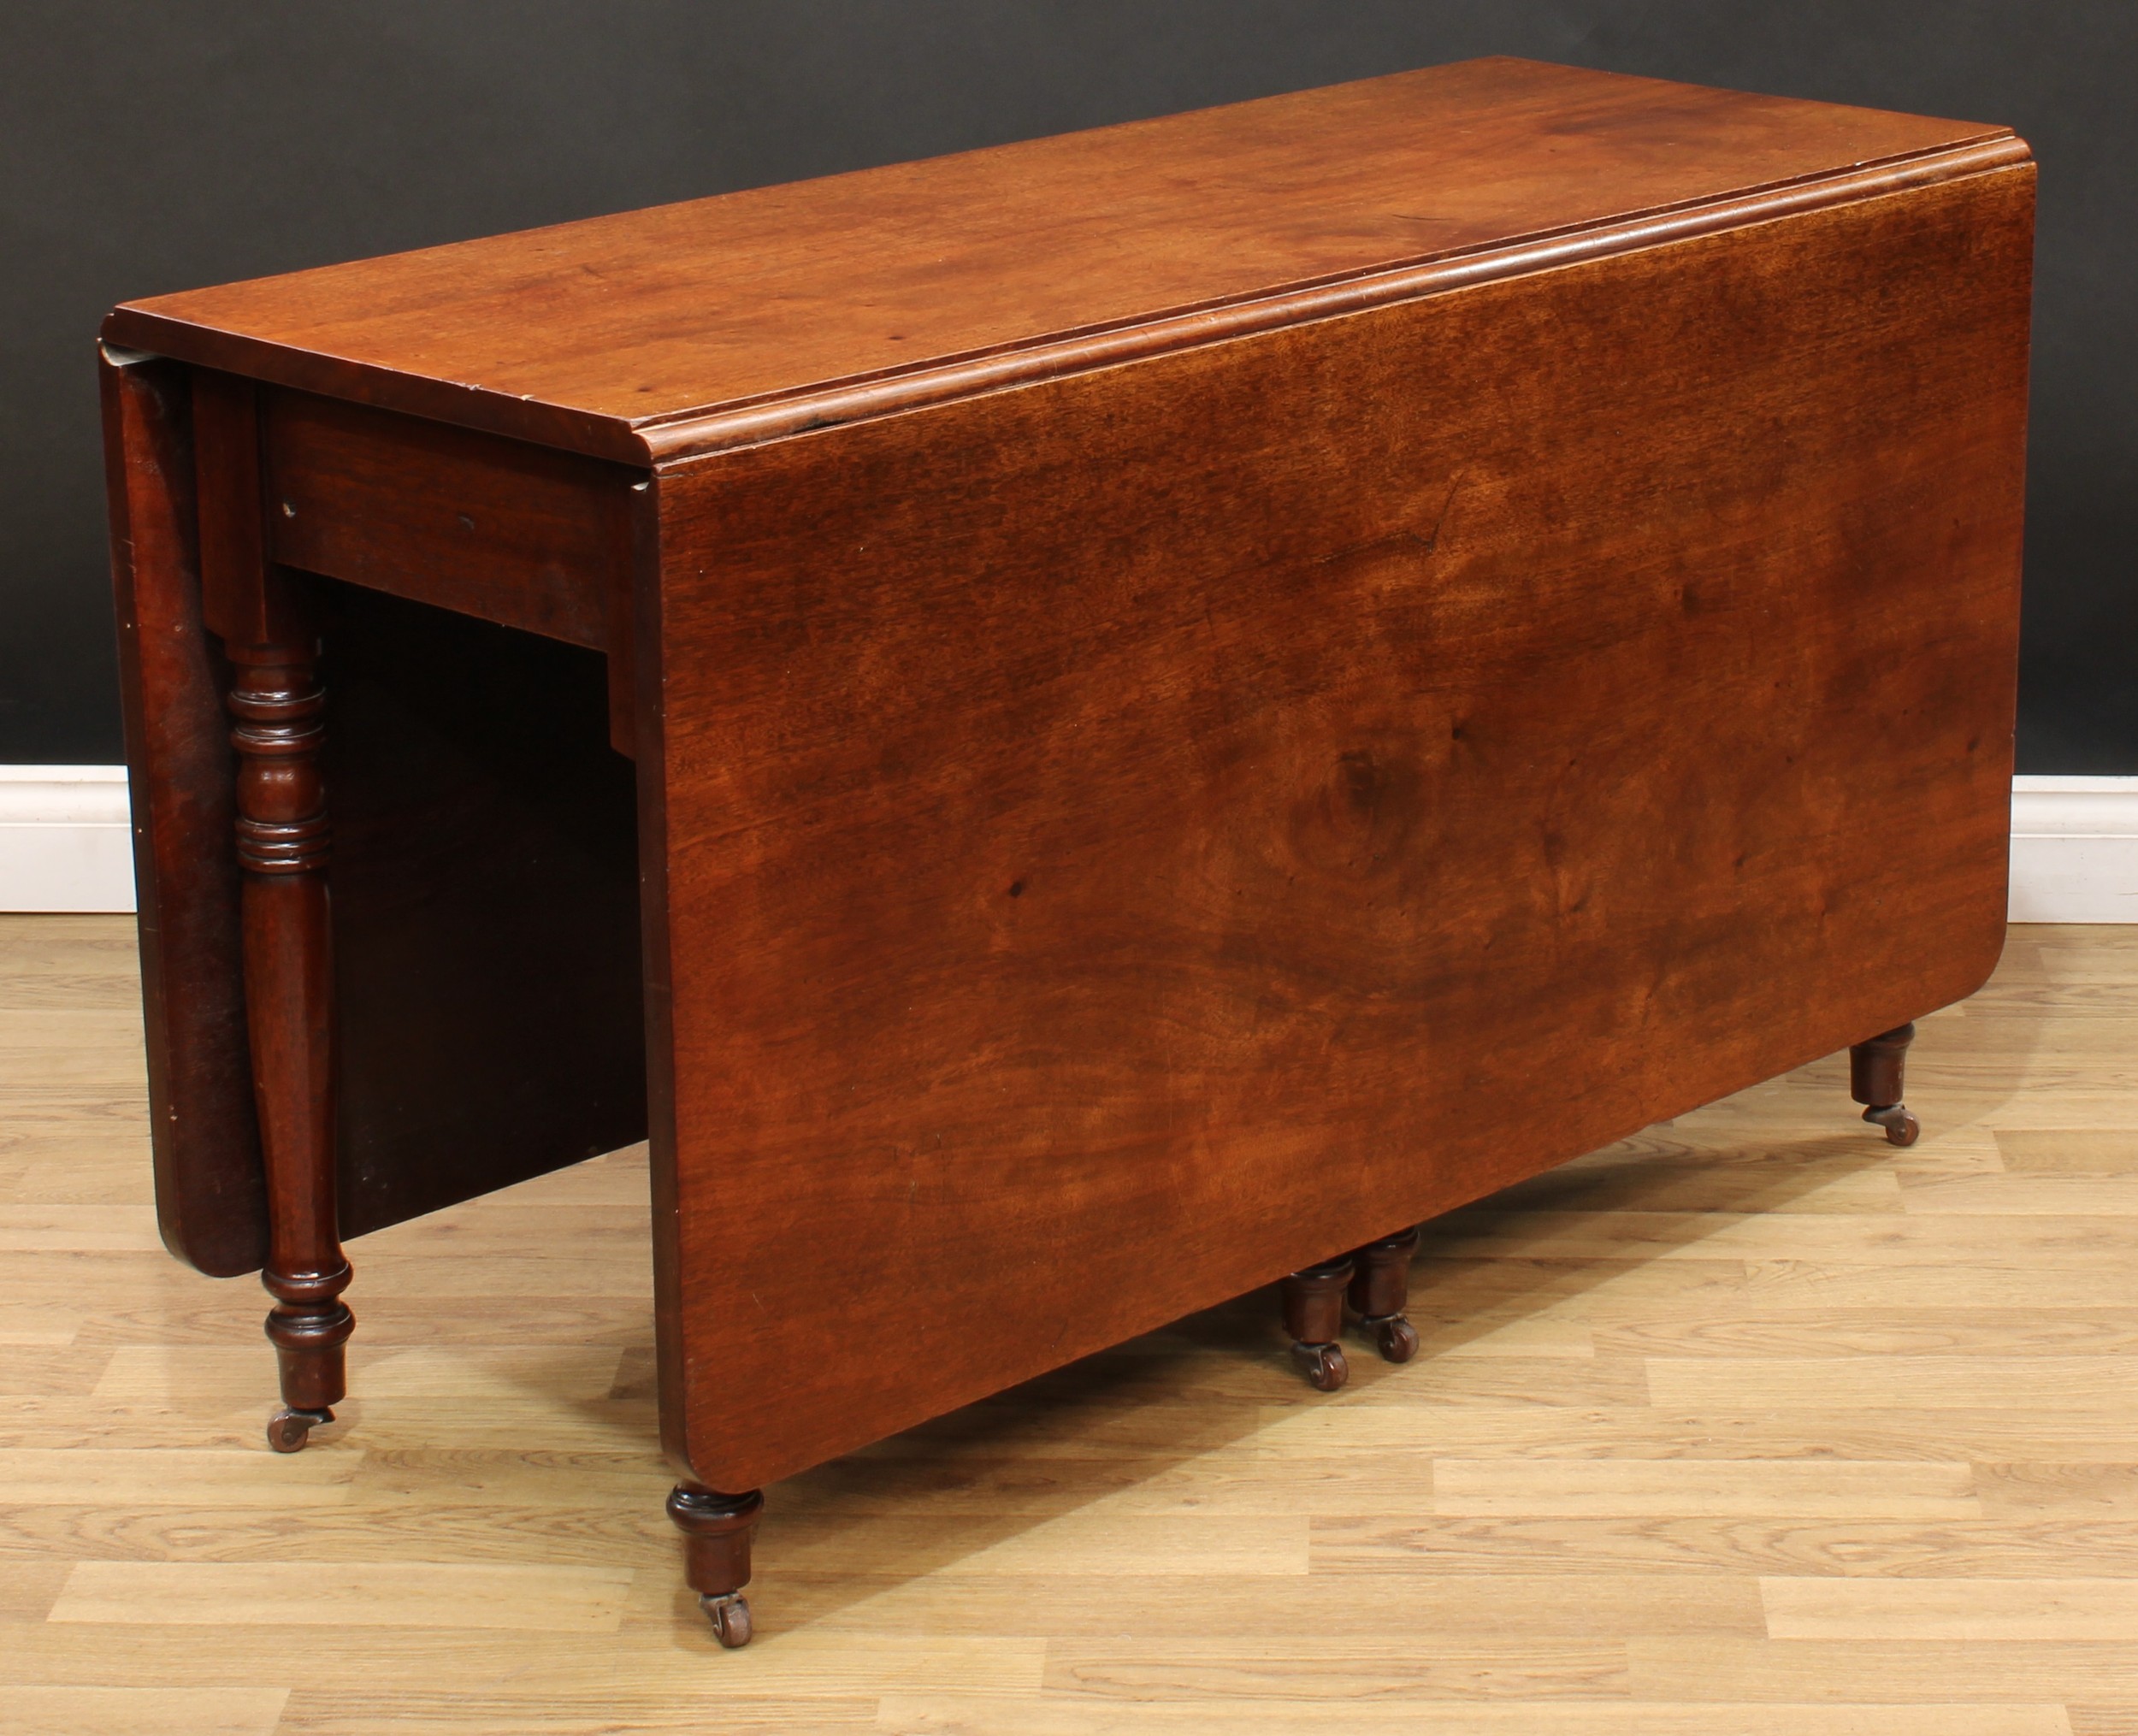 A 19th century mahogany gateleg dining table, rectangular top with fall leaves, ring-turned legs, - Image 4 of 4